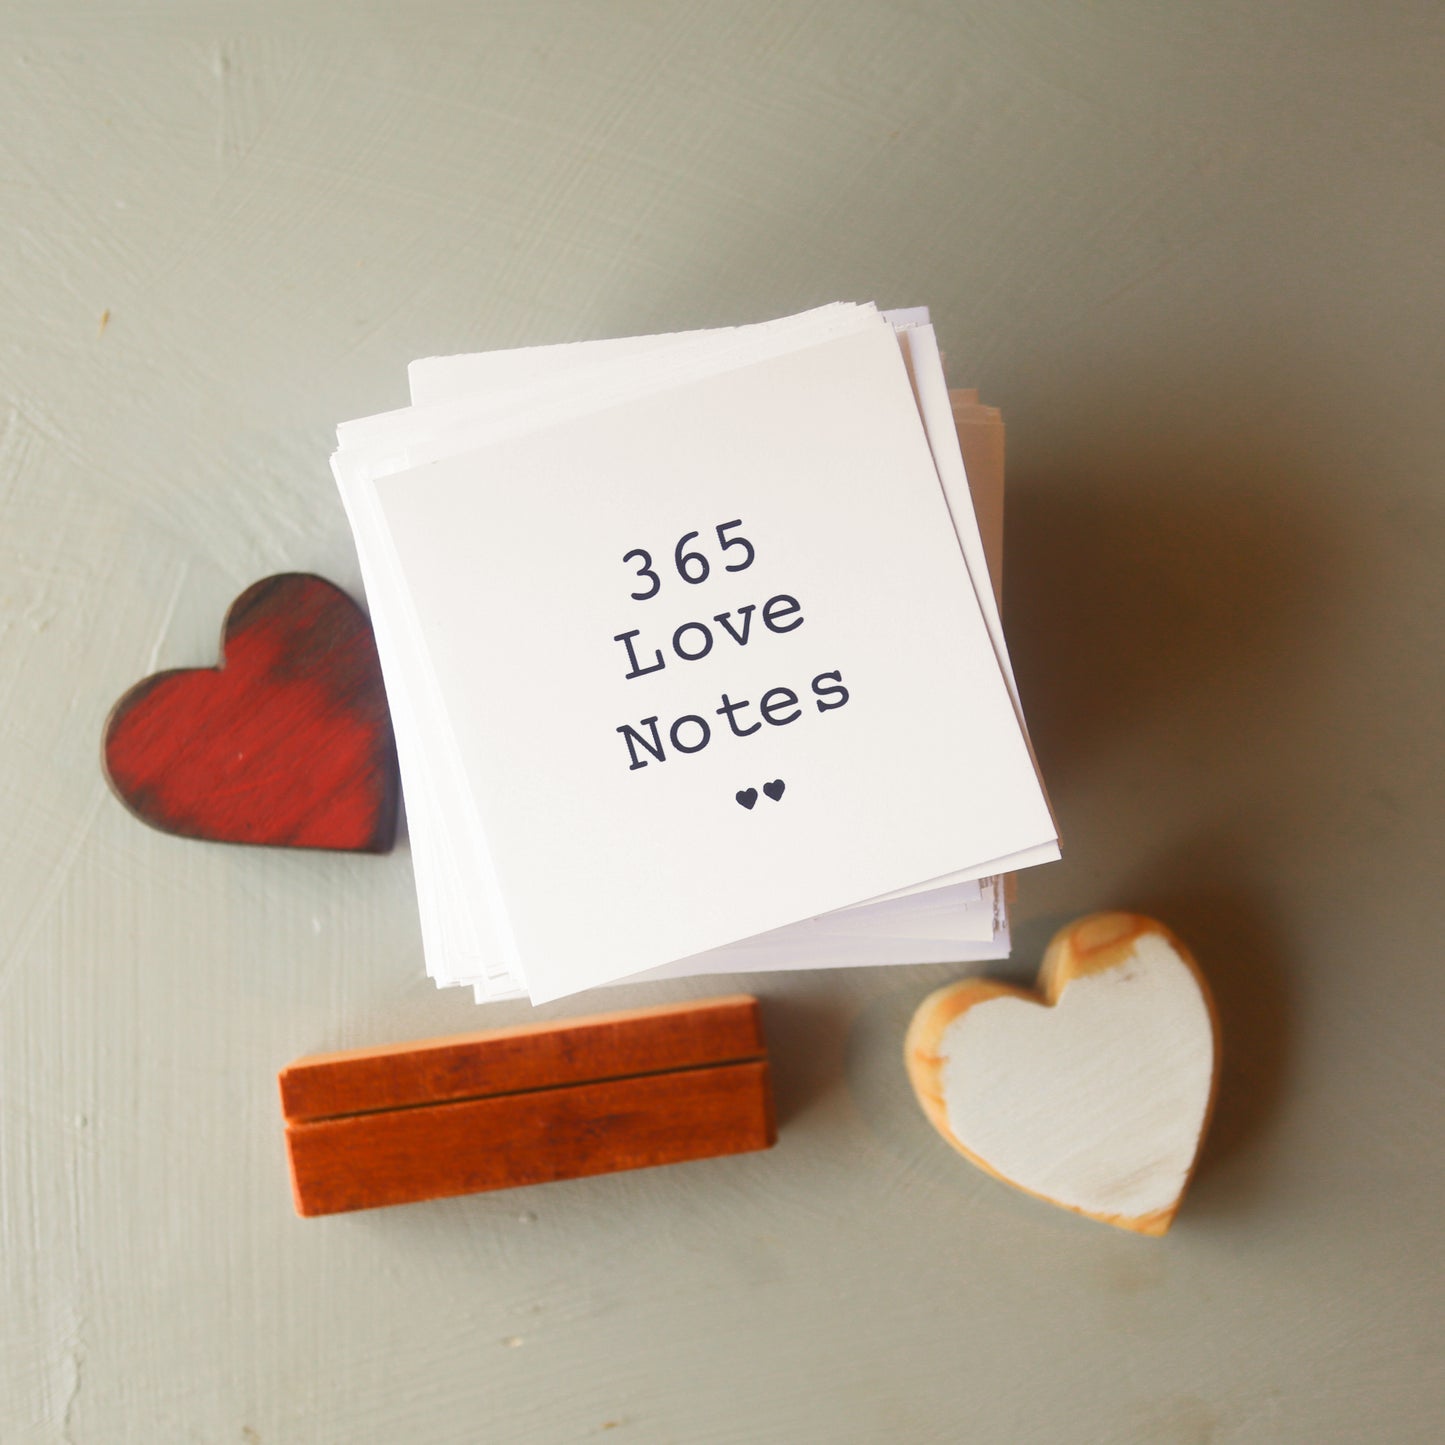 365 Love Notes